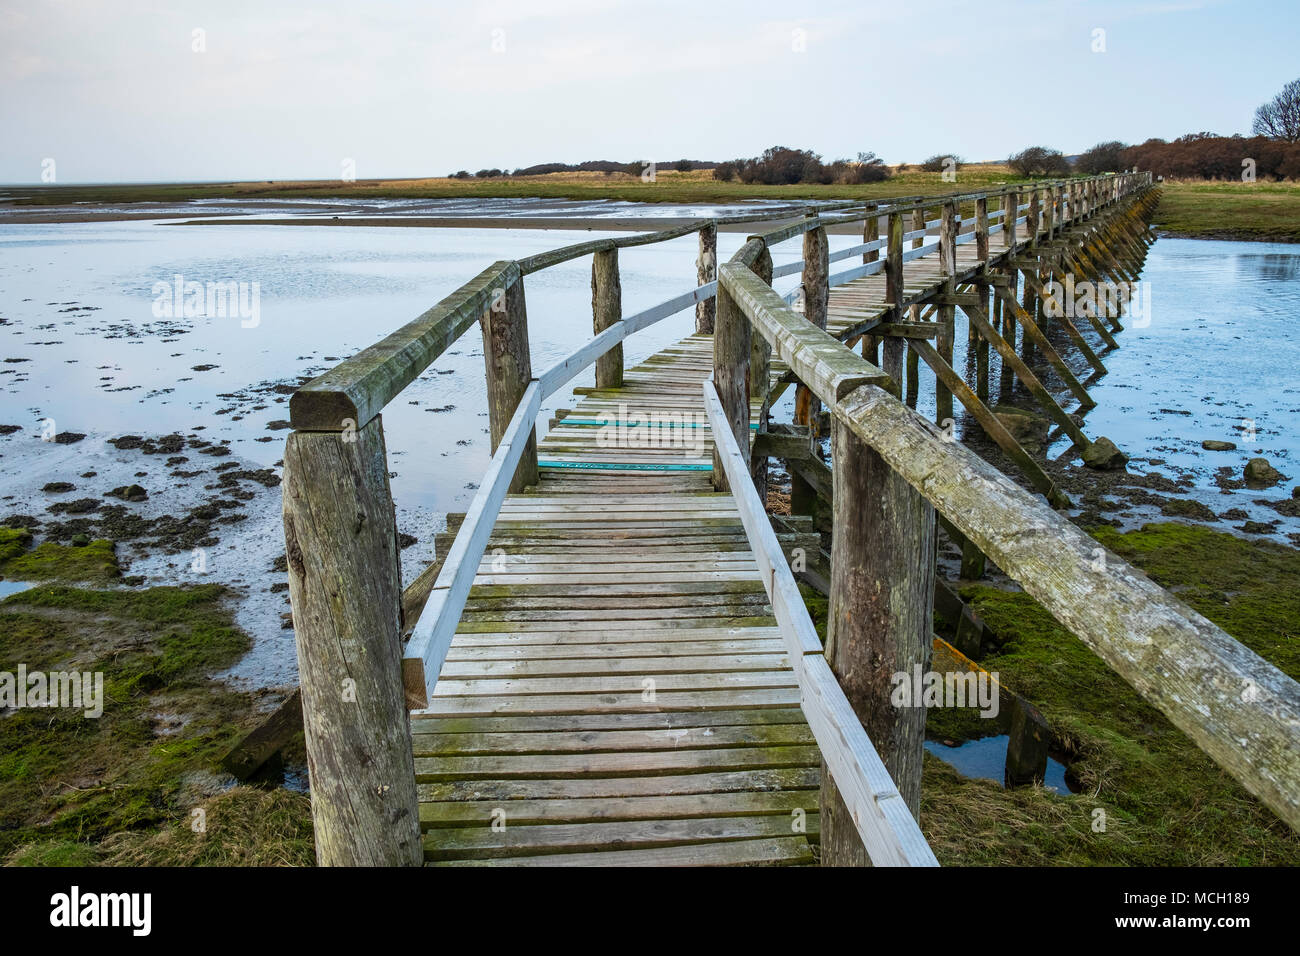 View of wooden footbridge leading to Aberlady Bay Nature Reserve on coast of Firth of Forth estuary in East Lothian, Scotland, UK Stock Photo